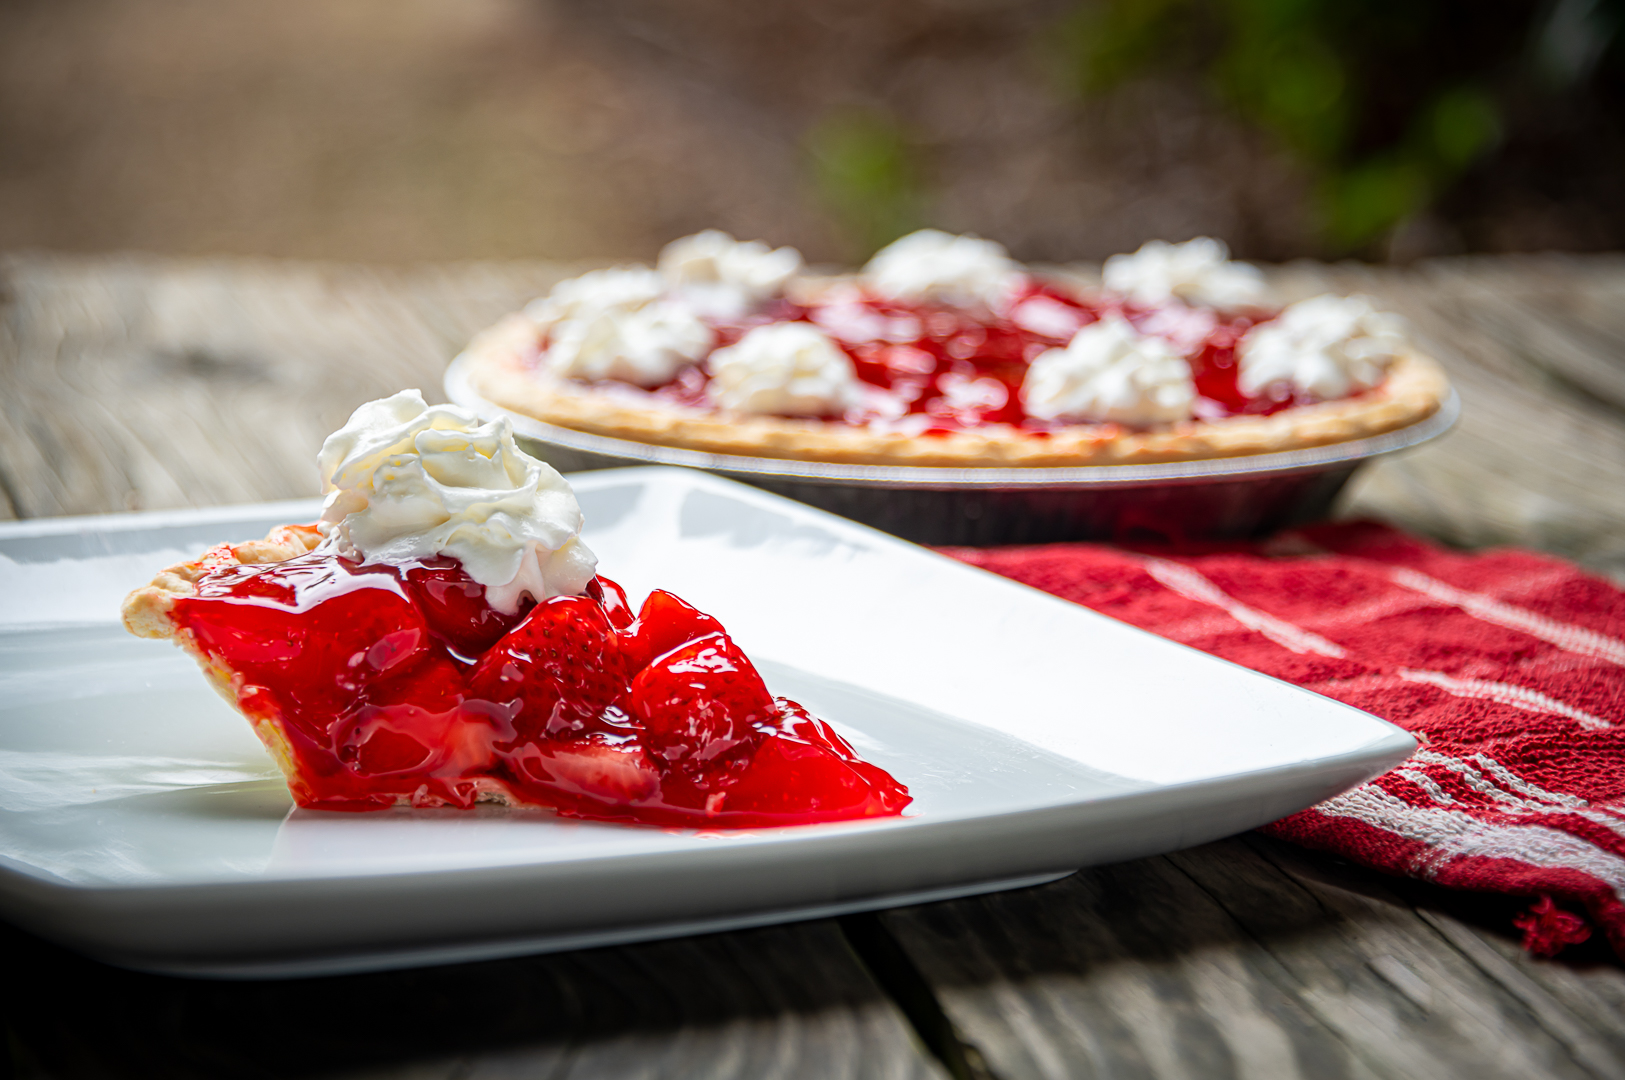 The sweet treat, rich in vitamin C and antioxidants, is delicious on its own or as an ingredient in a variety of dishes including strawberry pie. (Photo by David Ammon)